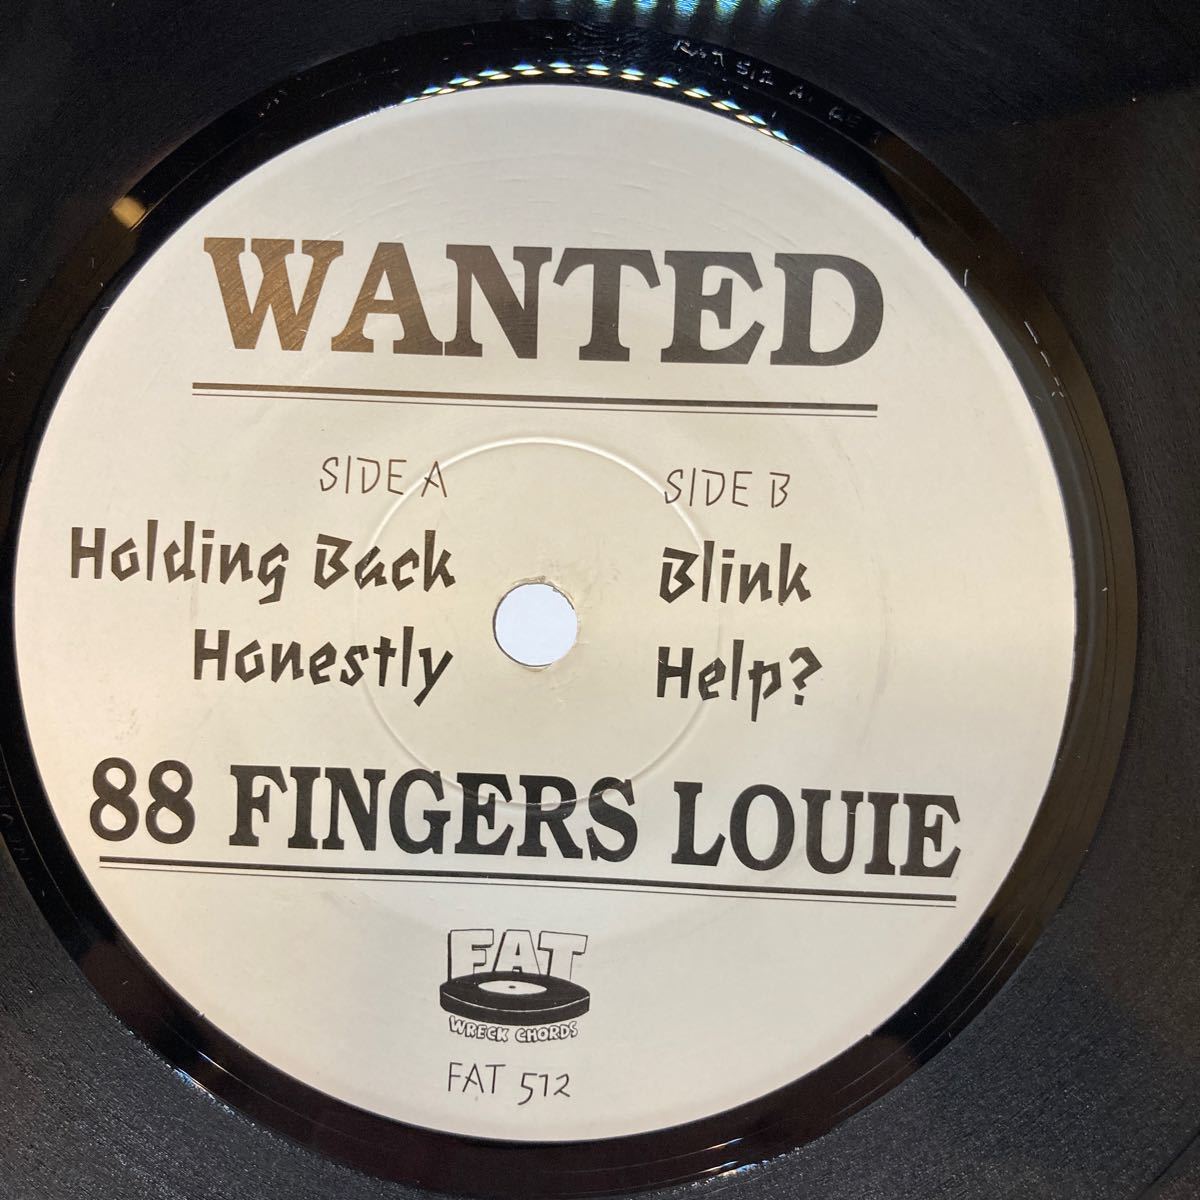 US盤 EP FAT512 / 88 Fingers Louie Wanted / 1993年_画像4